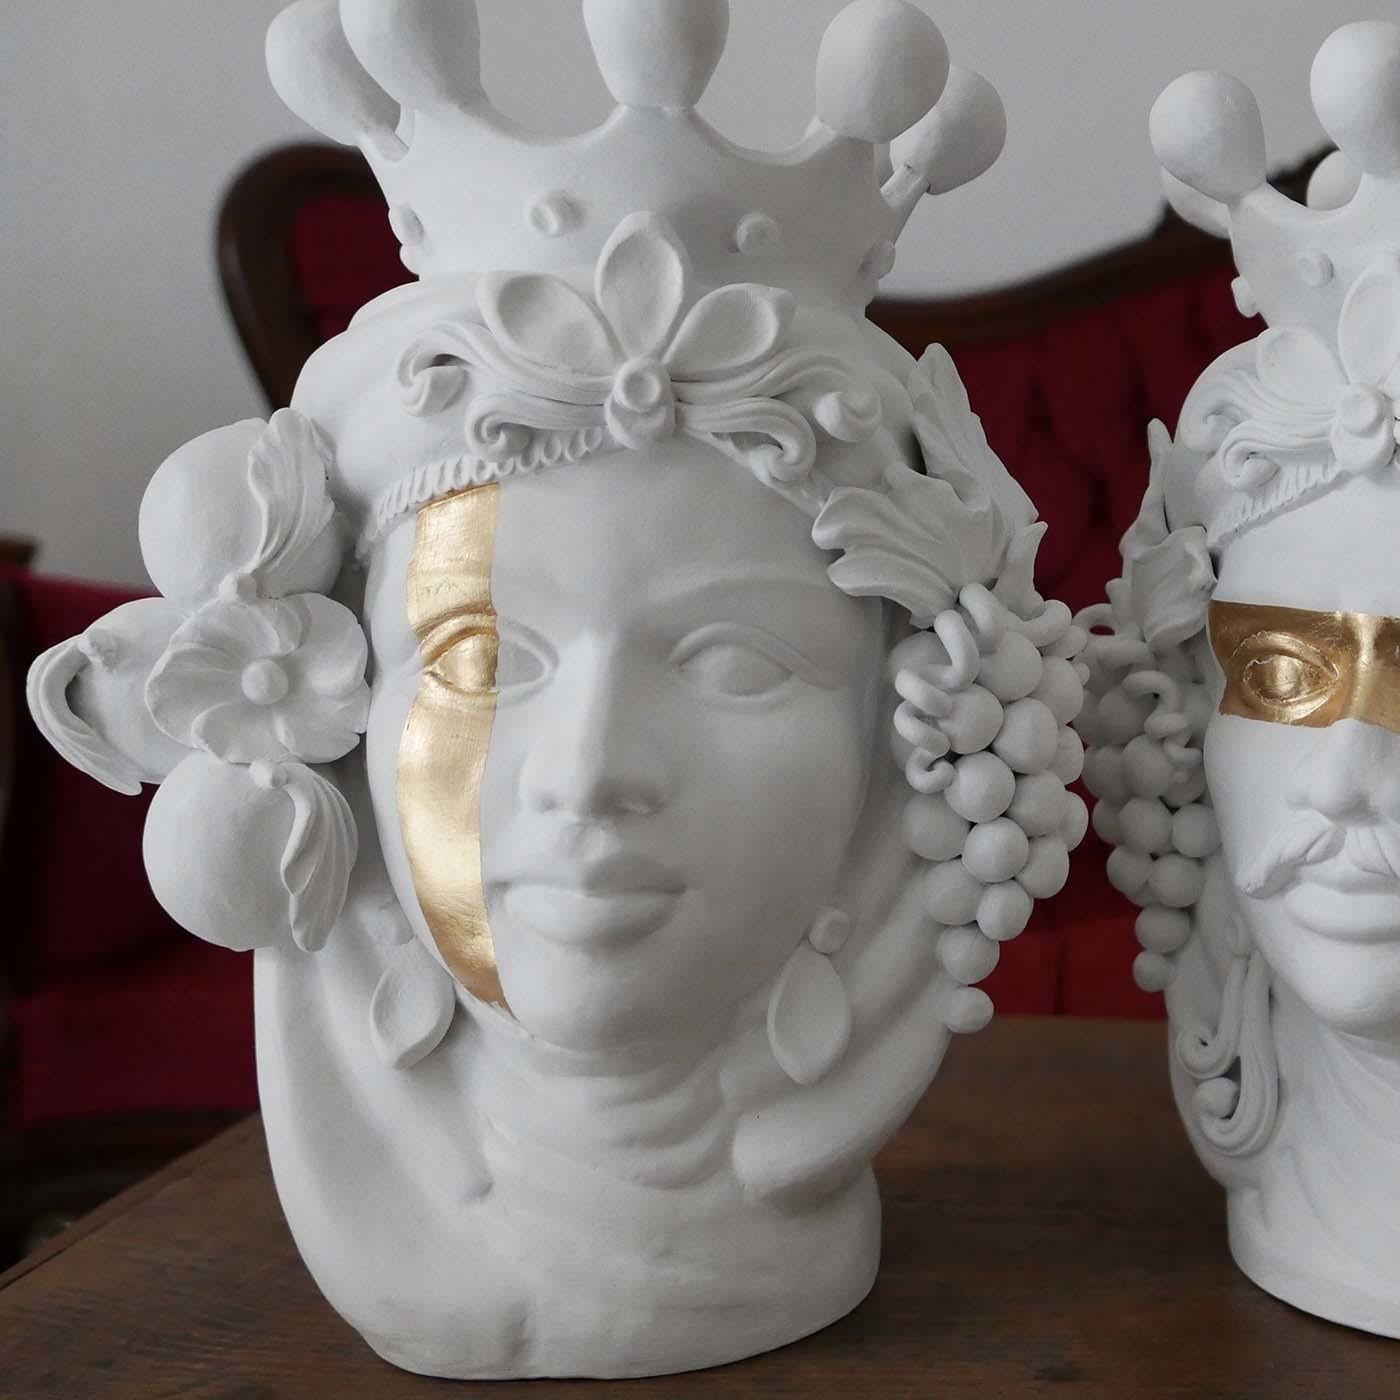 Distinguished for its deft use of sculptural details and simple colors, this handmade head vase will add dramatic flair to any kitchen, living room or entryway decor. This sculpture of a woman boasts a flawless white complexion framed by a supple